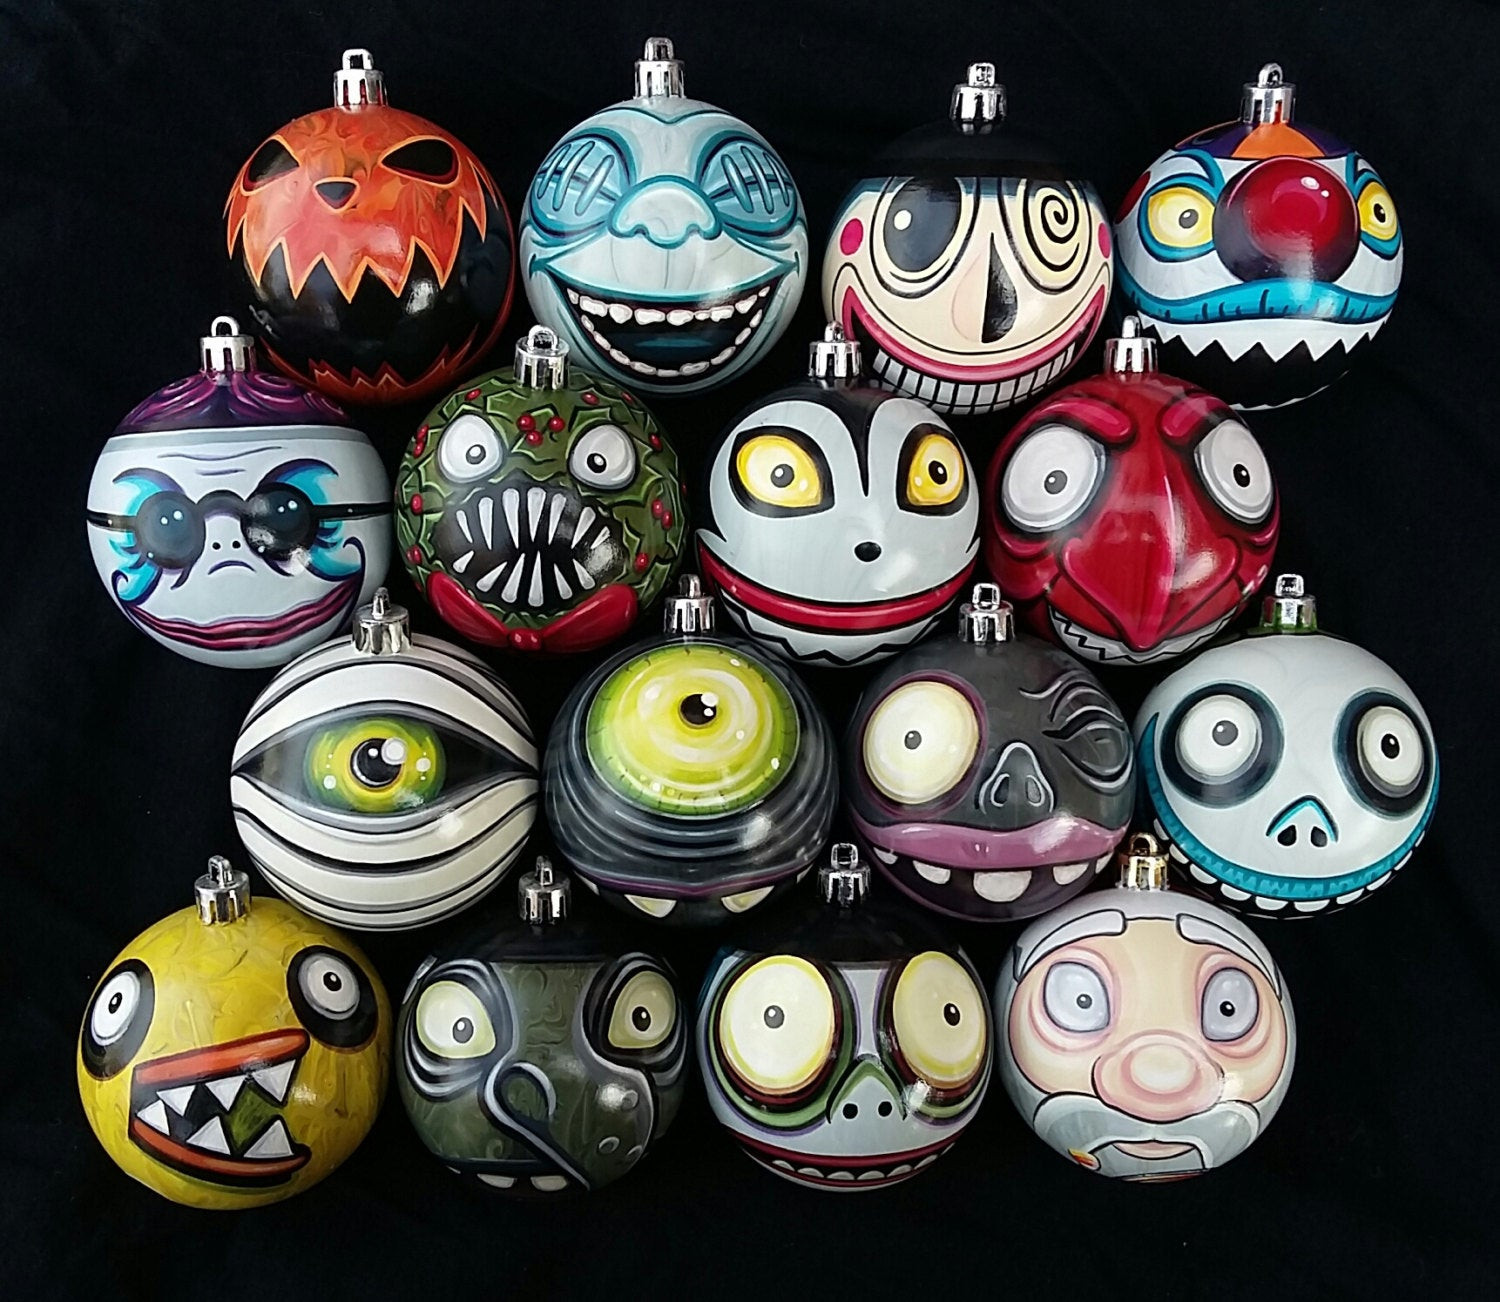 Nightmare Before Christmas Ornaments DIY
 Any Character Nightmare Before Christmas by AndreaHathcockArt